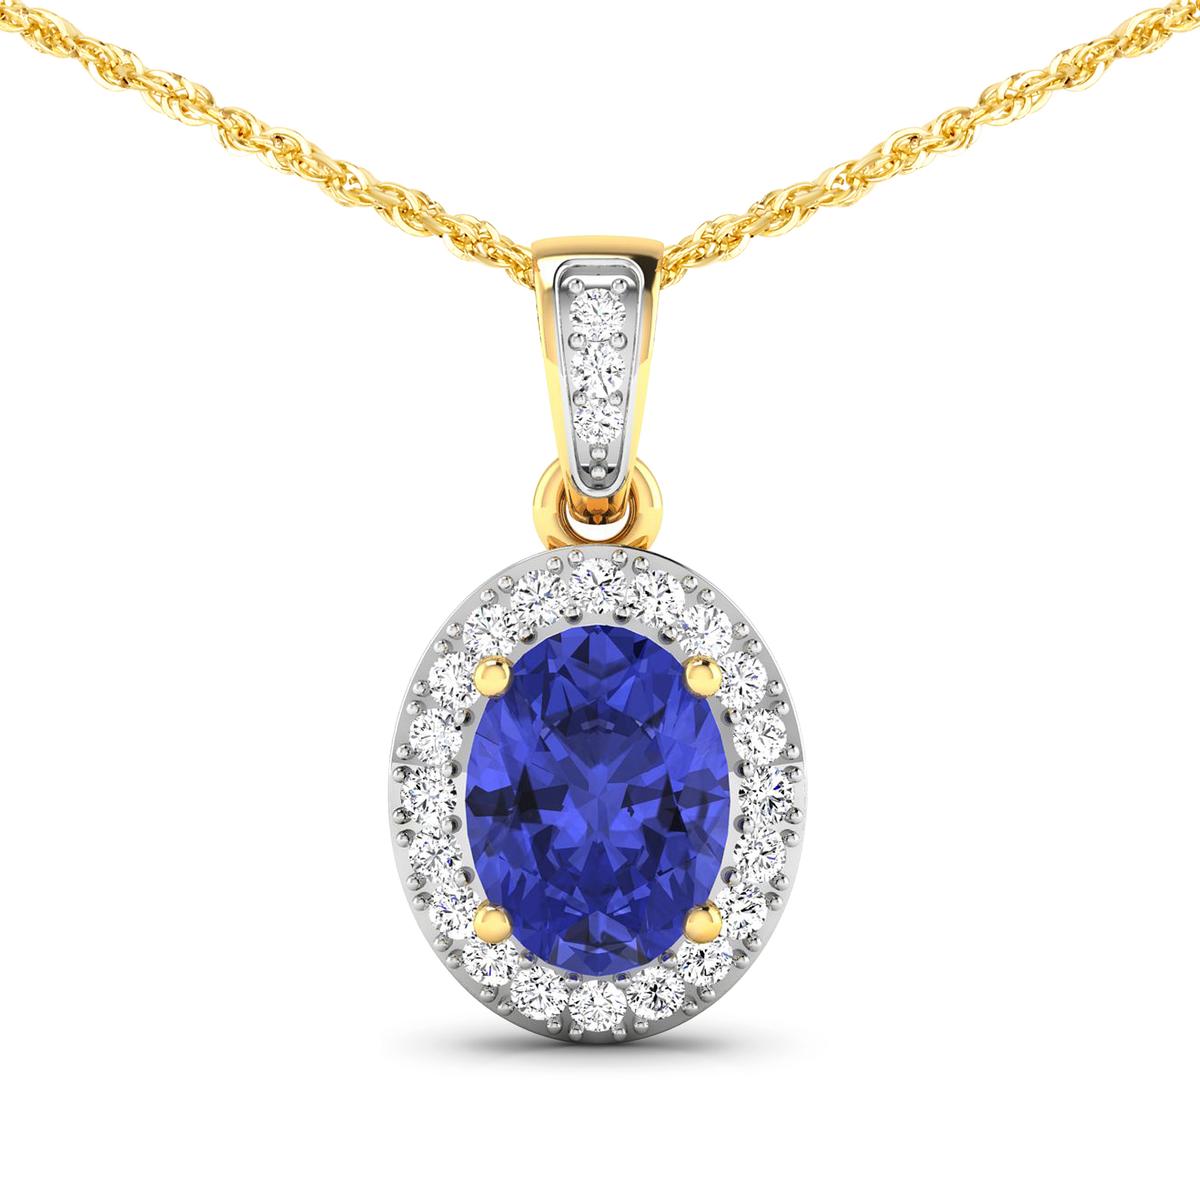 14KT Yellow Gold 1.09ct Tanzanite and Diamond Pendant with Chain